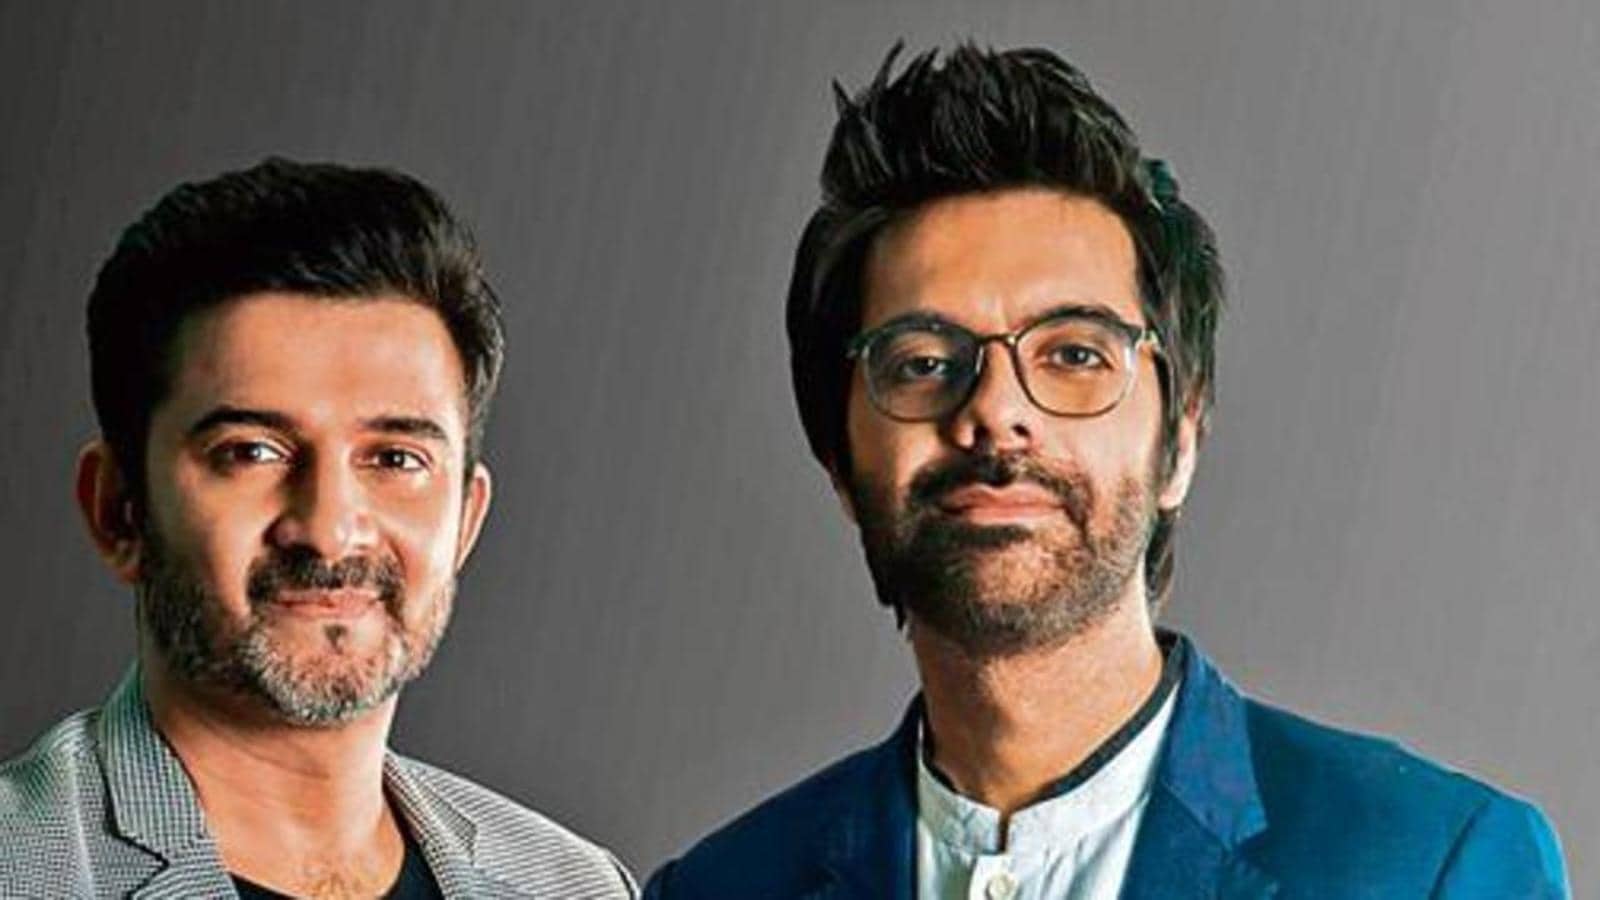 Sachin-Jigar: Now artistes have to understand they can't depend on ...